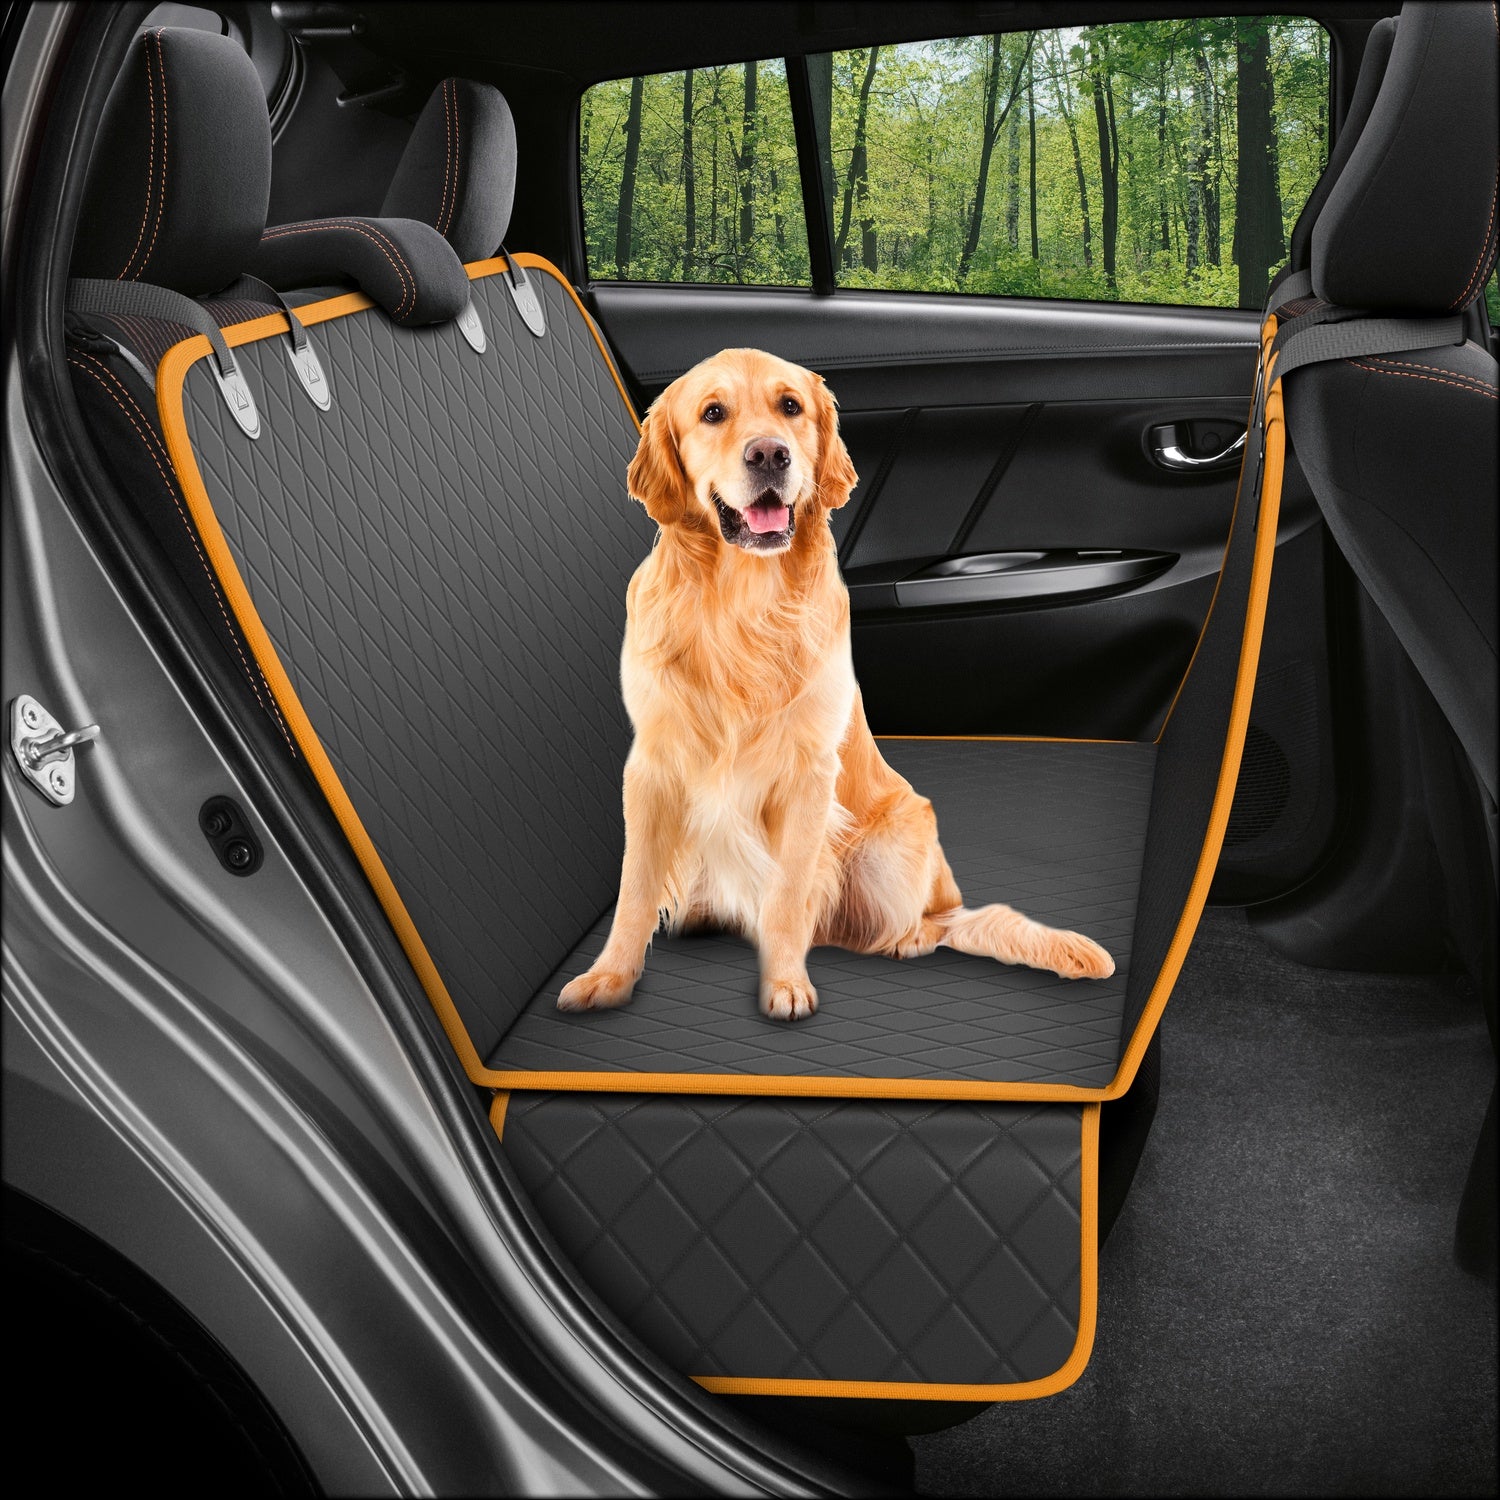 Waterproof Dog Seat Covers for Cars Washable Backseat Dog Cover for Cars Trucks & SUVs Durable Scratch Proof Nonslip Active Pets Bench Dog Car Seat Cover for Back Seat Protector for Pet Fur & Mud 